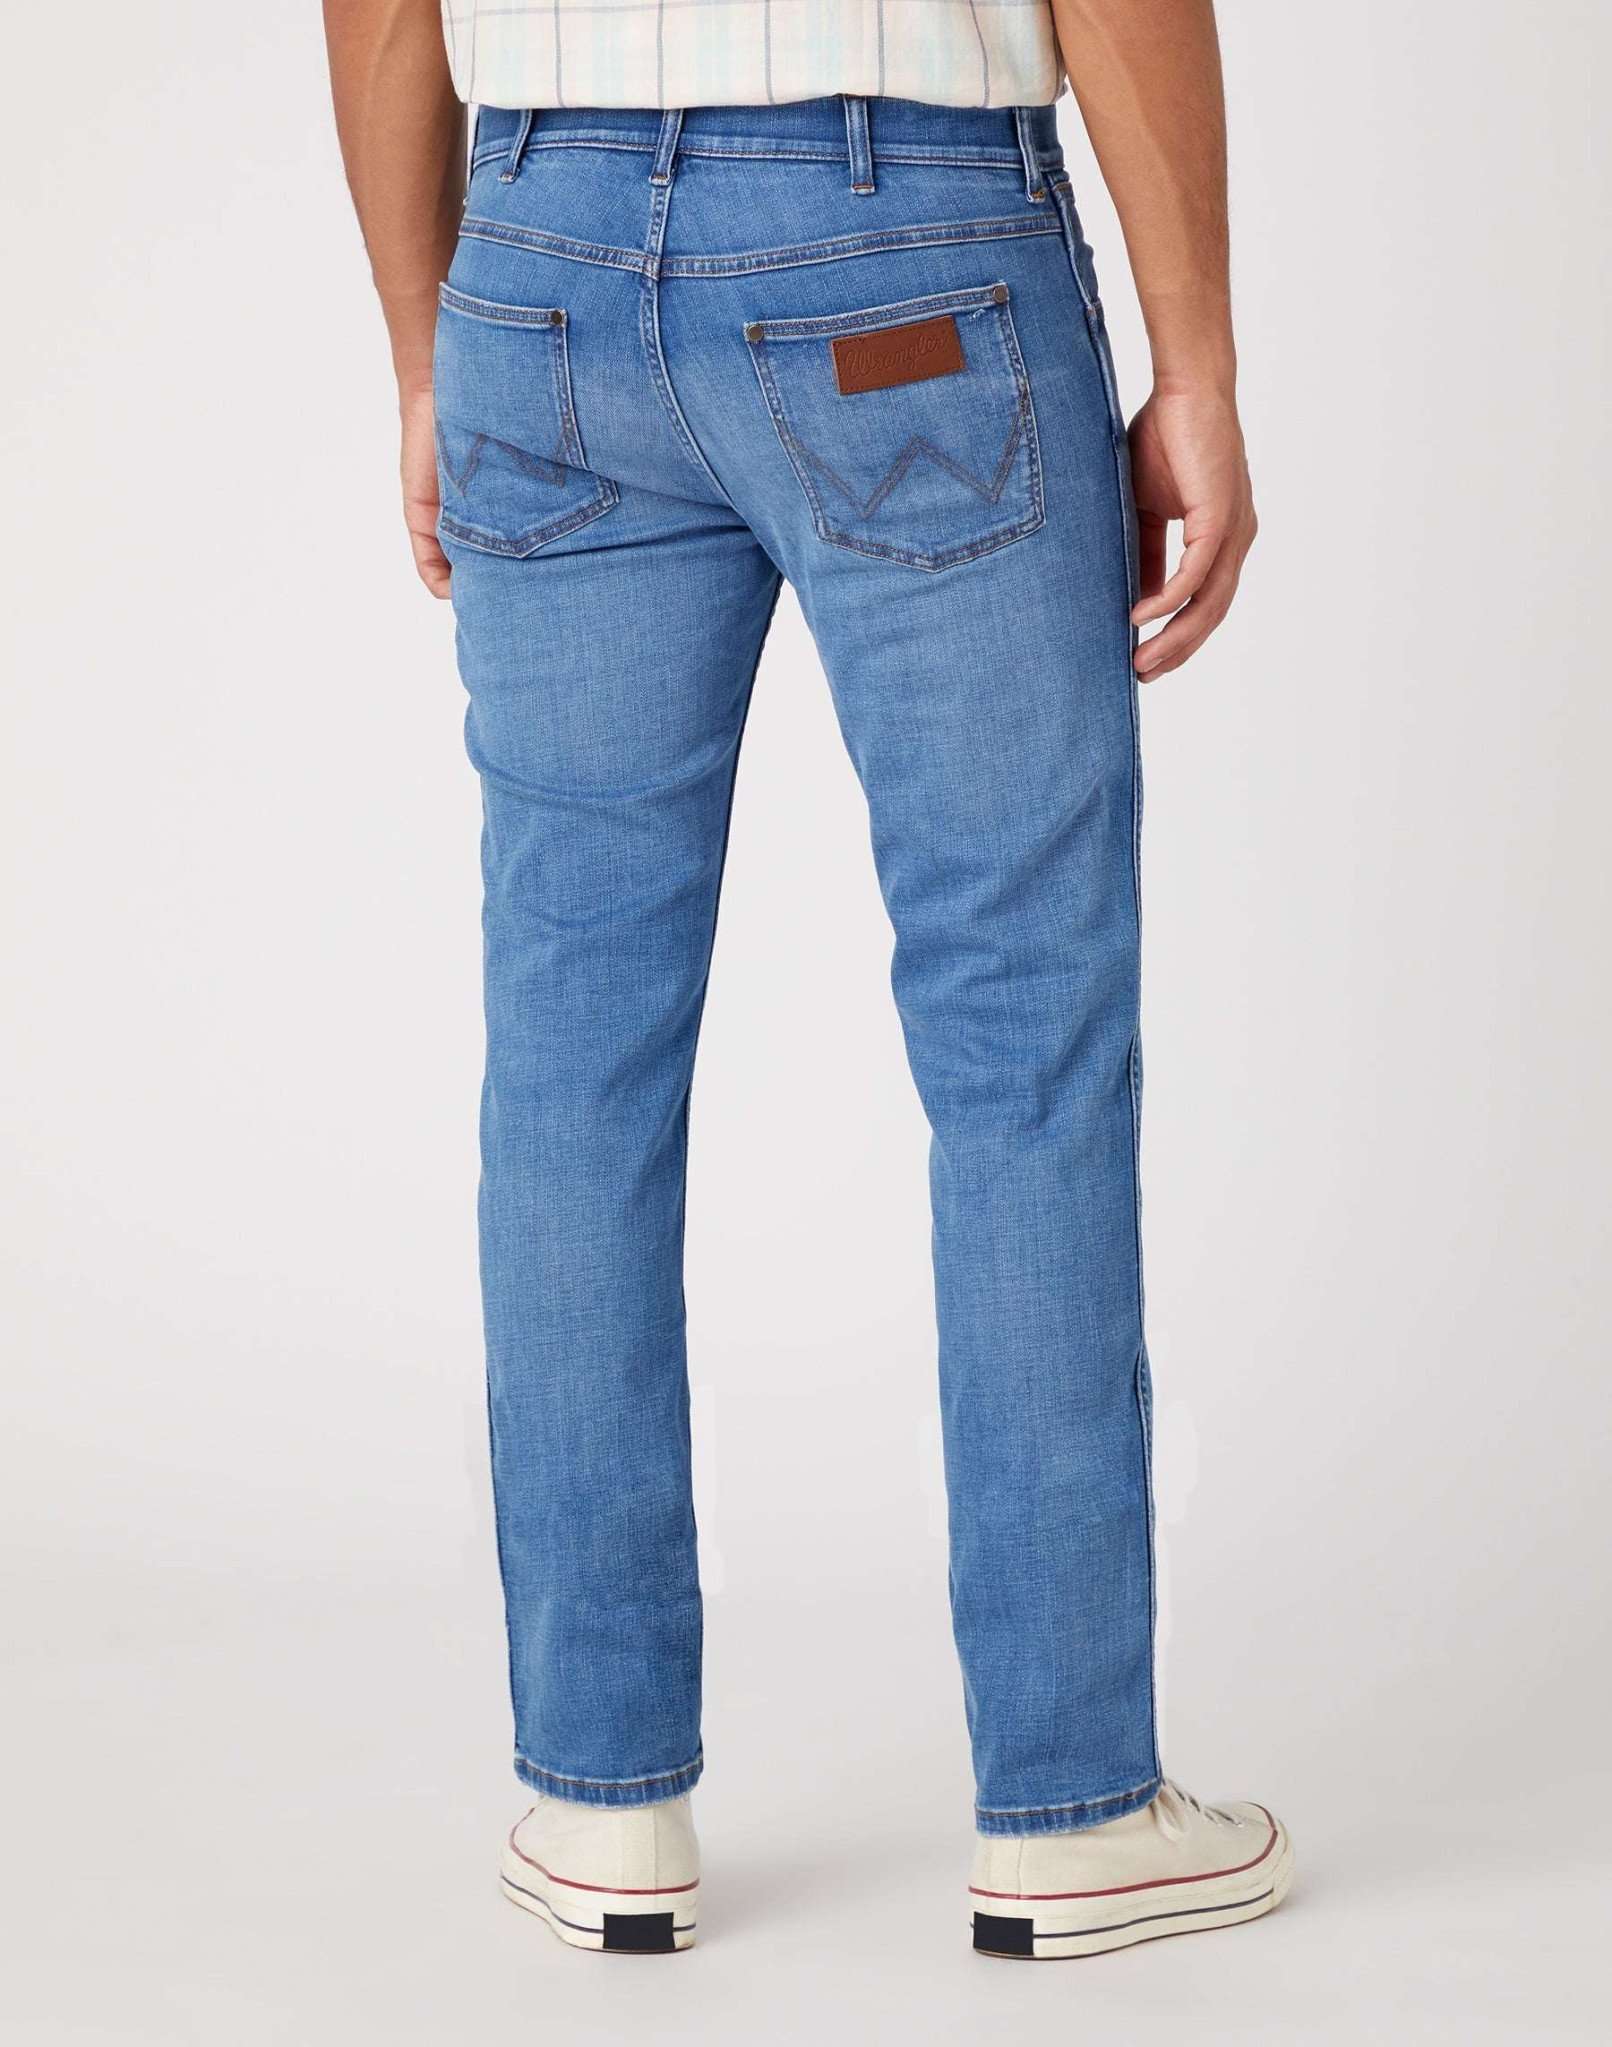 Greensboro High Stretch in End Game Jeans Wrangler   